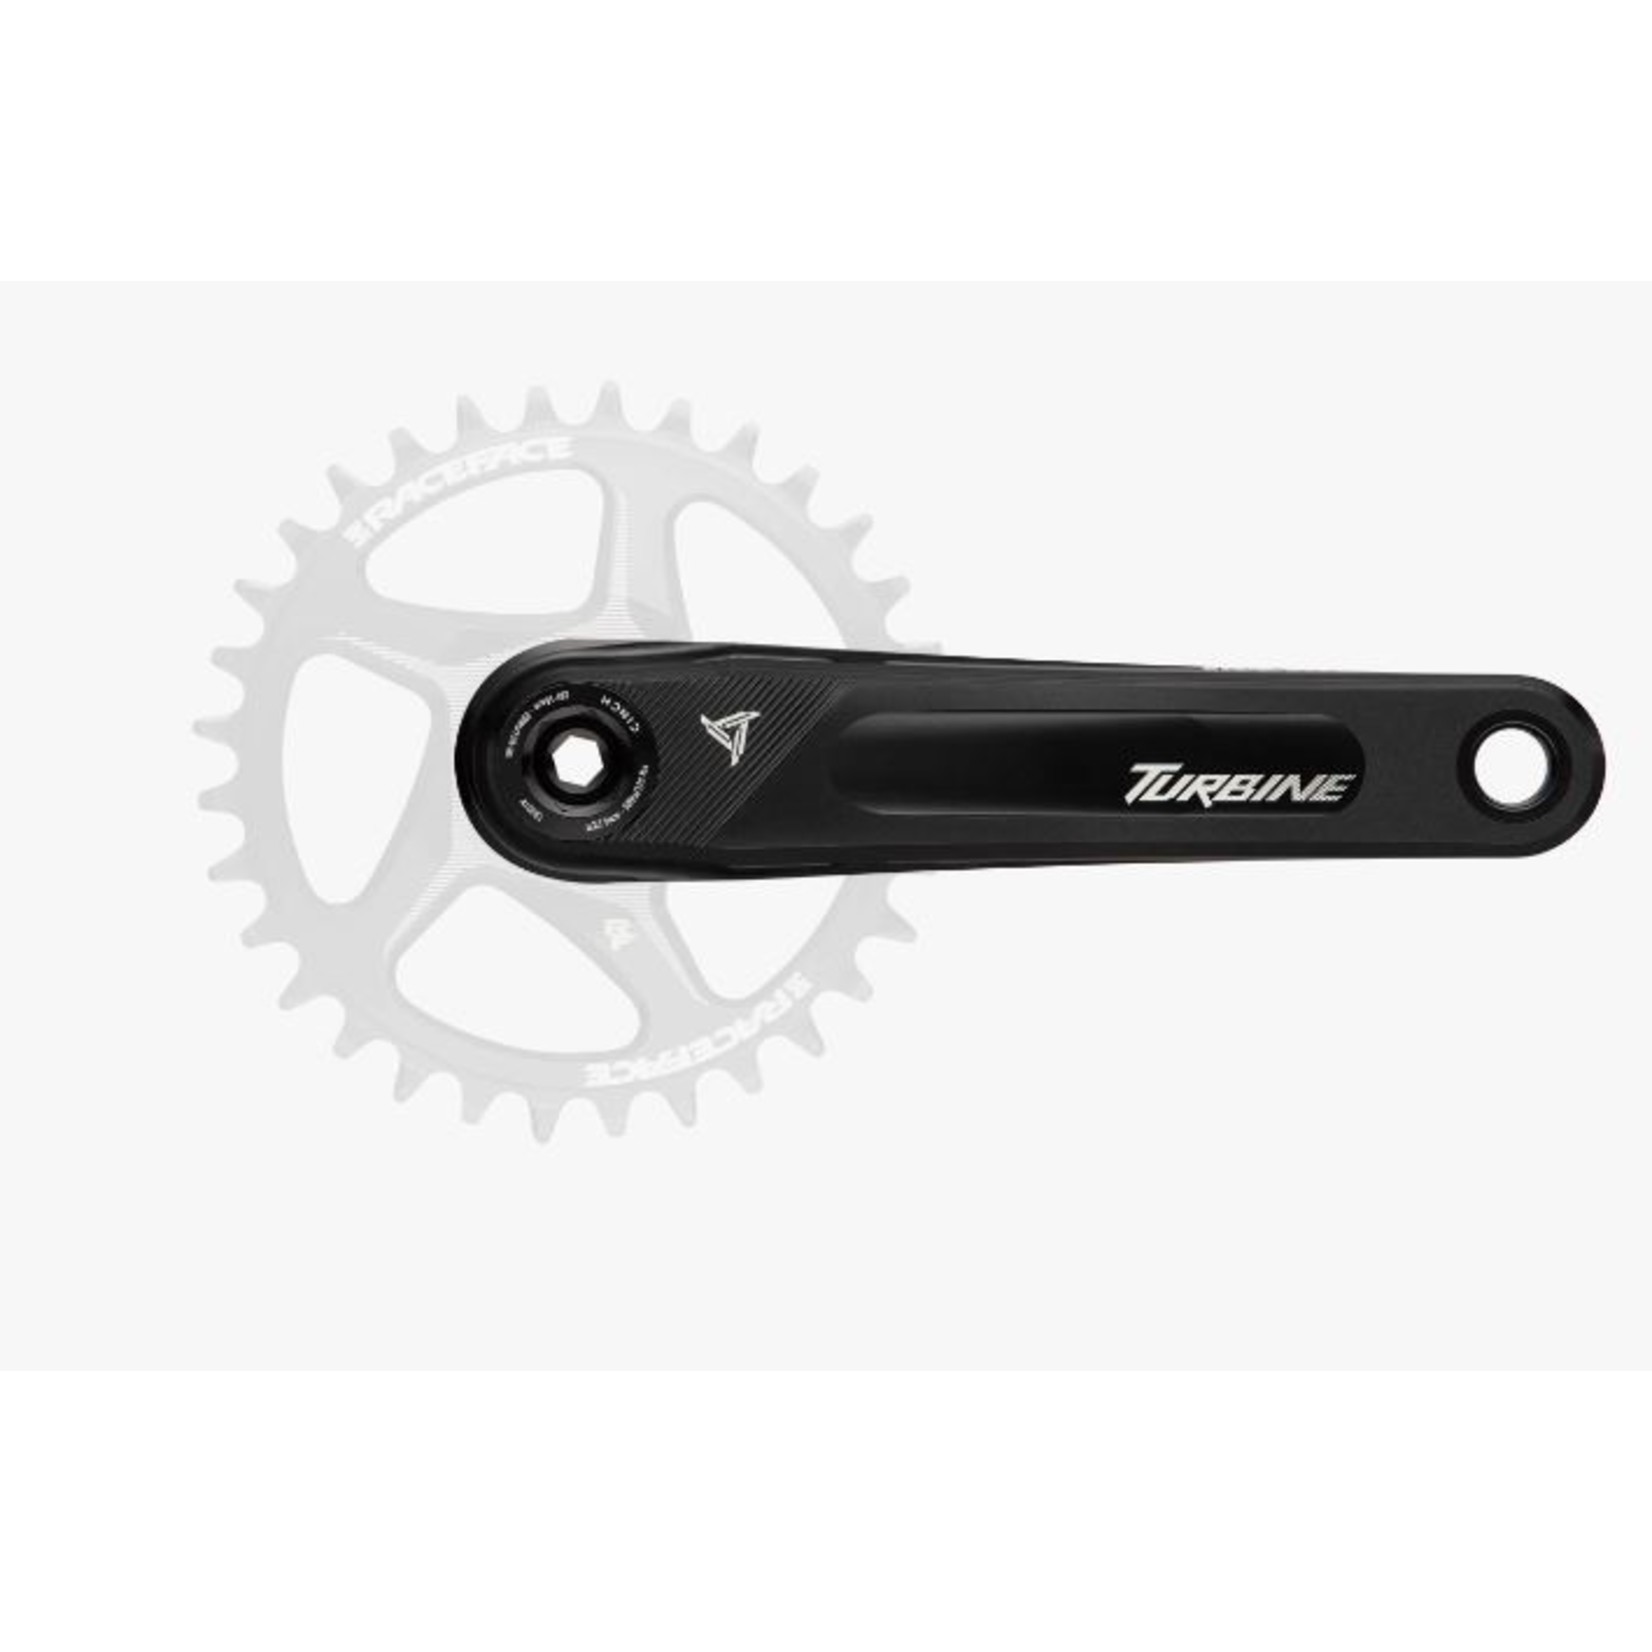 Race Face Turbine Crankset, 170mm with 136mm spindle length